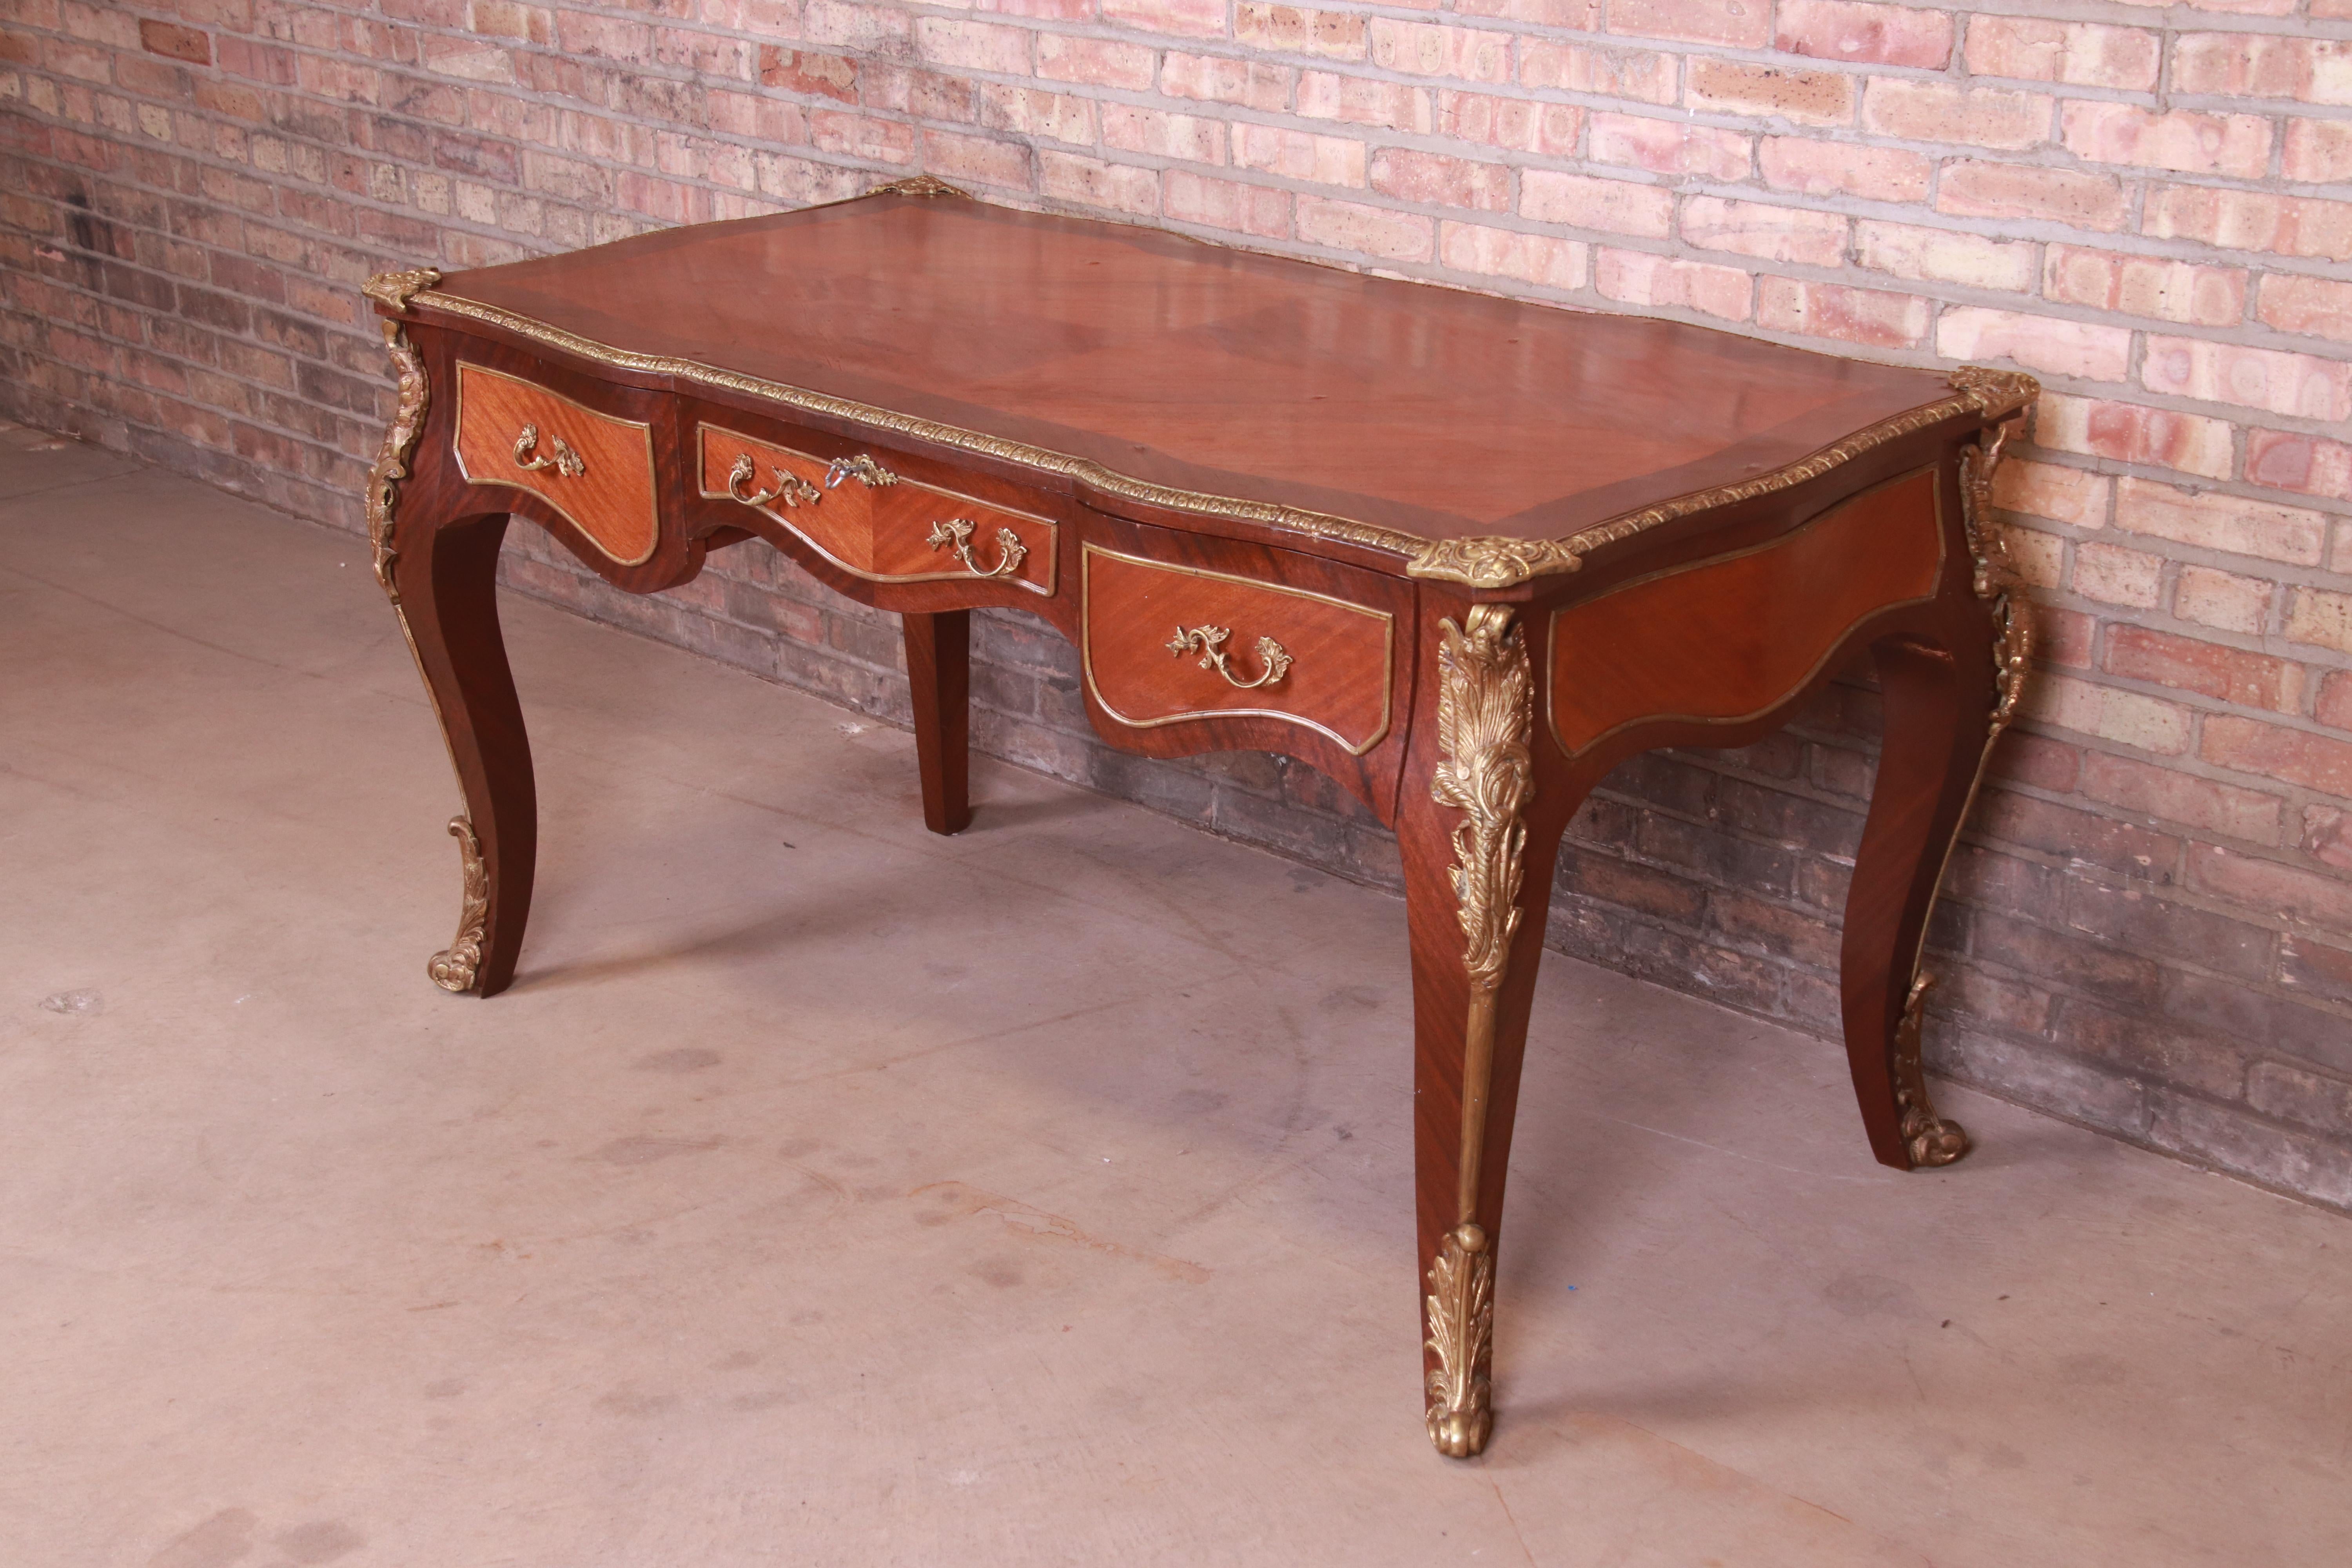 A gorgeous French Provincial Louis XV style executive writing desk or bureau plat desk

France, early 20th century

Mahogany with satinwood inlay, and original brass trim and ormolu.

Measures: 60.5